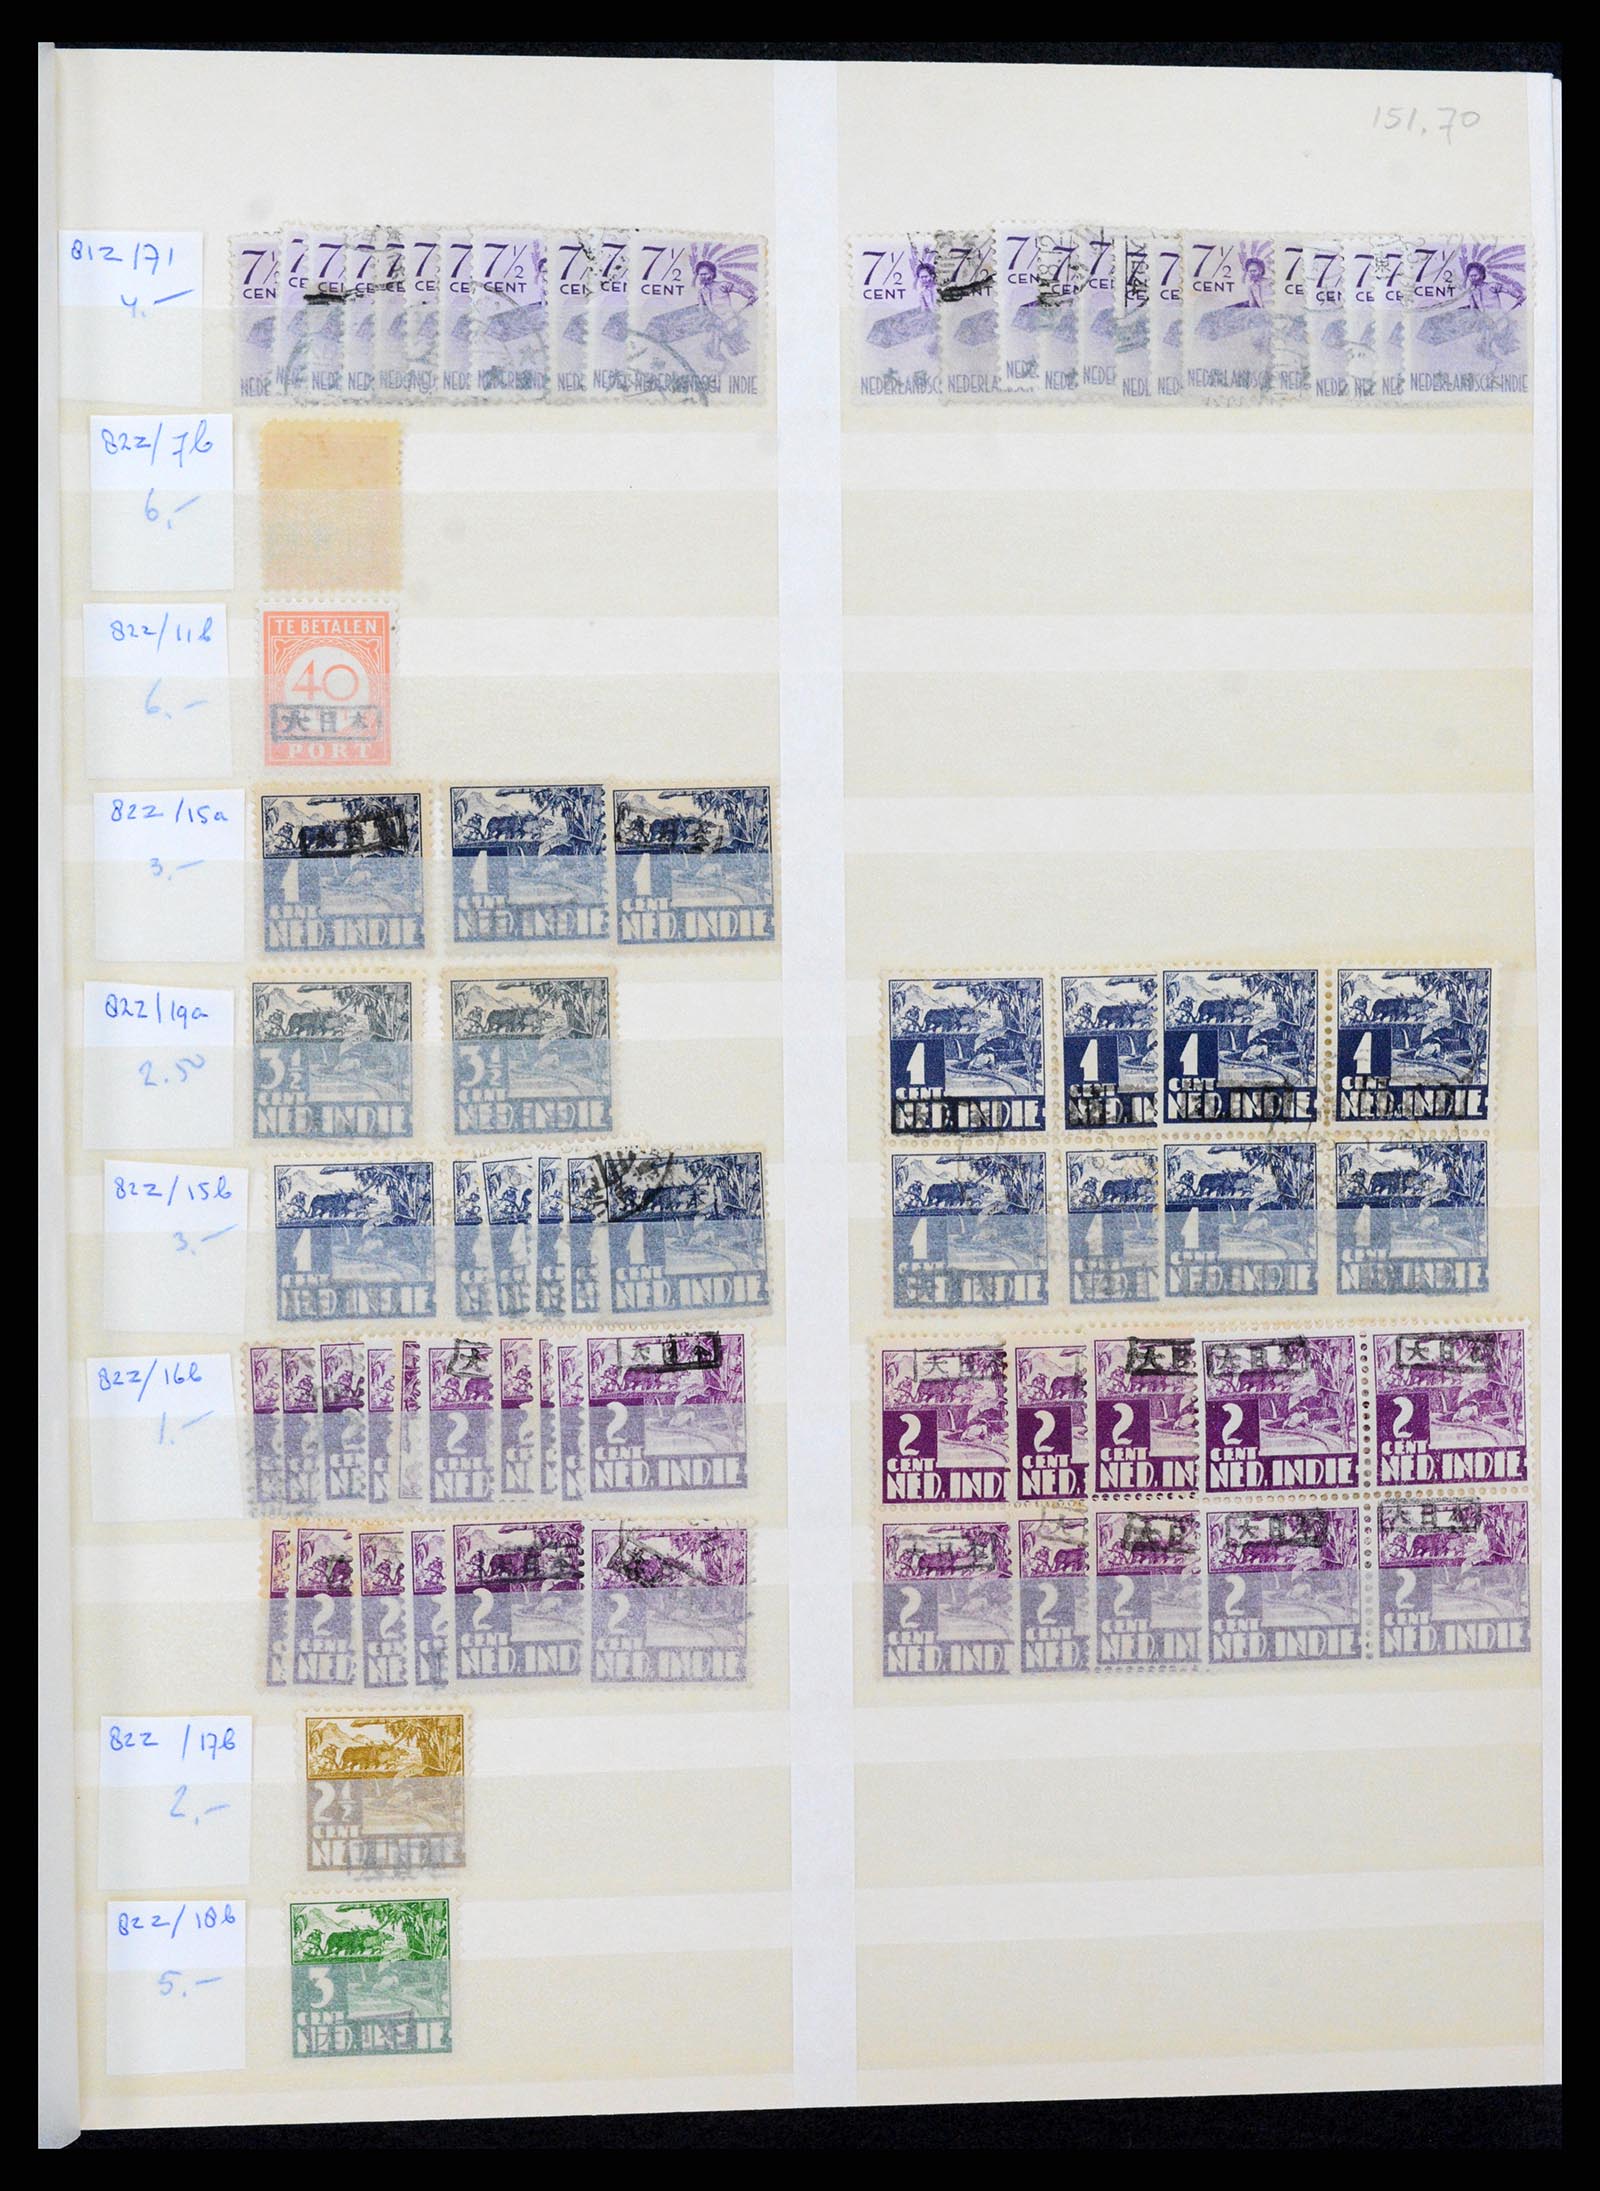 37429 007 - Stamp collection 37429 Japanese occupation Dutch East Indies 1942-1945.